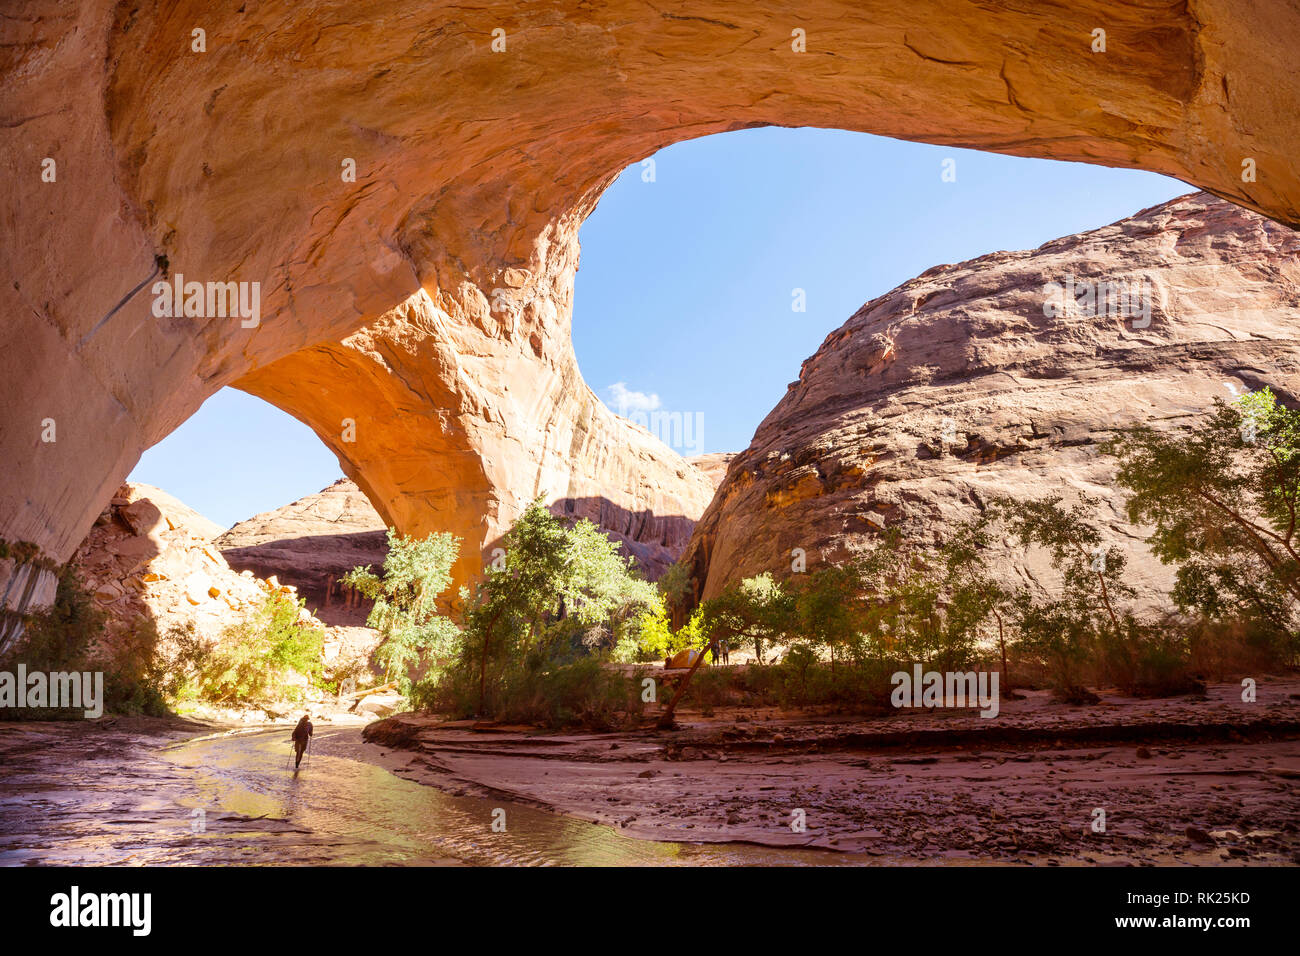 Jacob Hamblin Arch in Coyote Gulch, Grand Staircase-Escalante National Monument, Utah, United States Stock Photo